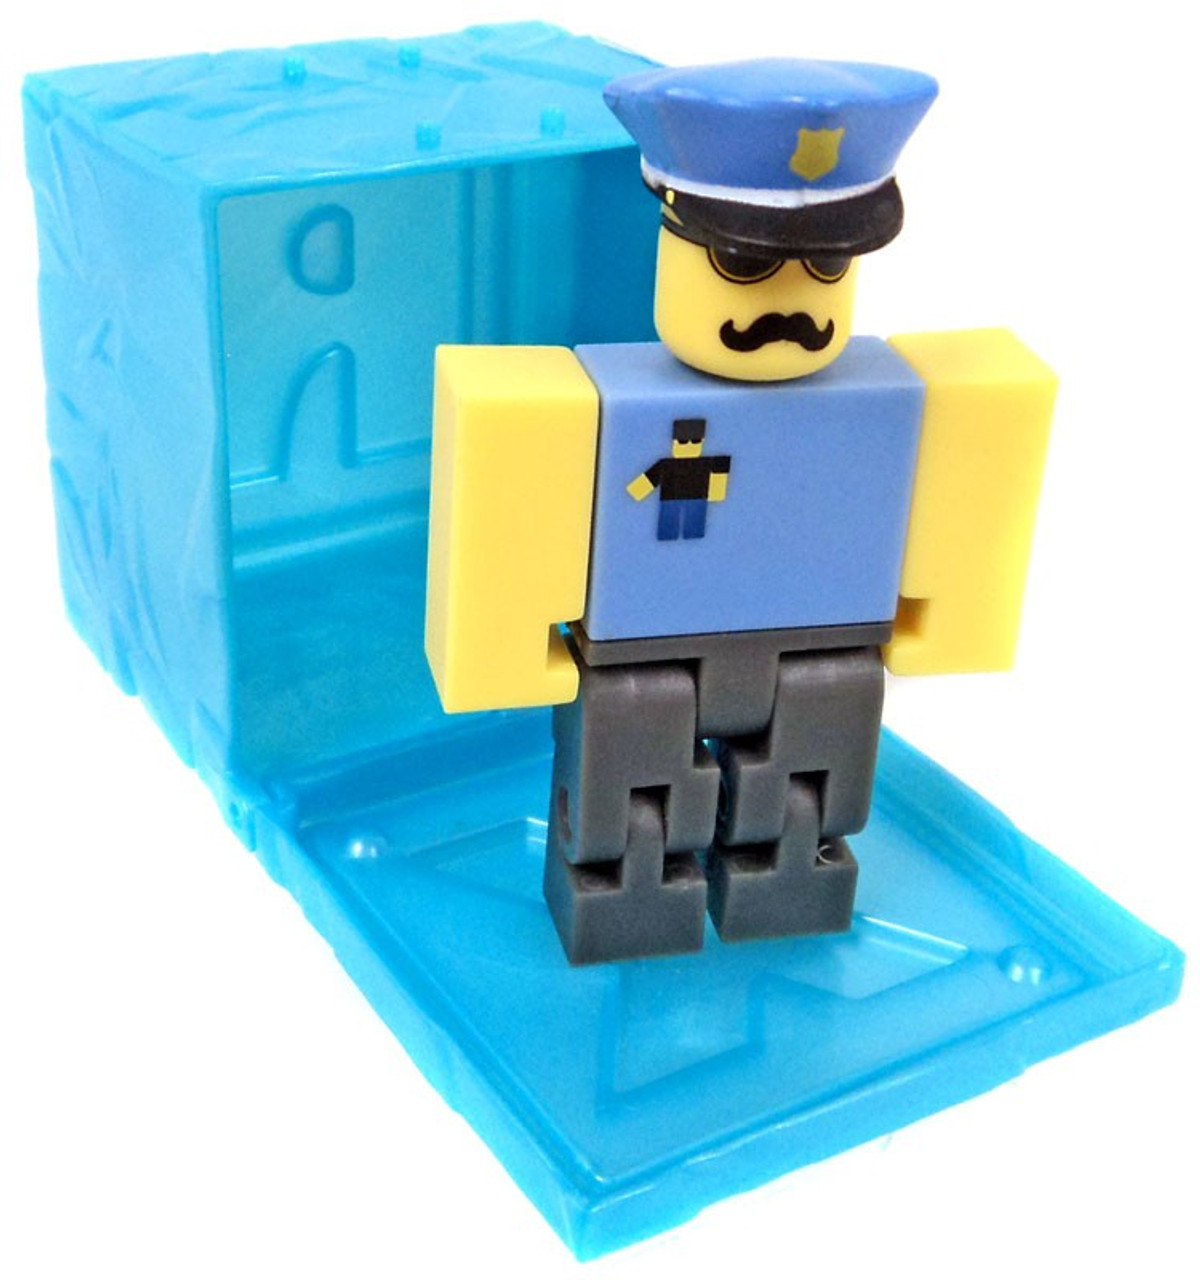 Roblox Red Series 3 Retail Tycoon Rent A Cop 3 Mini Figure Blue Cube With Online Code Loose Jazwares Toywiz - chai and jens super store super shop roblox